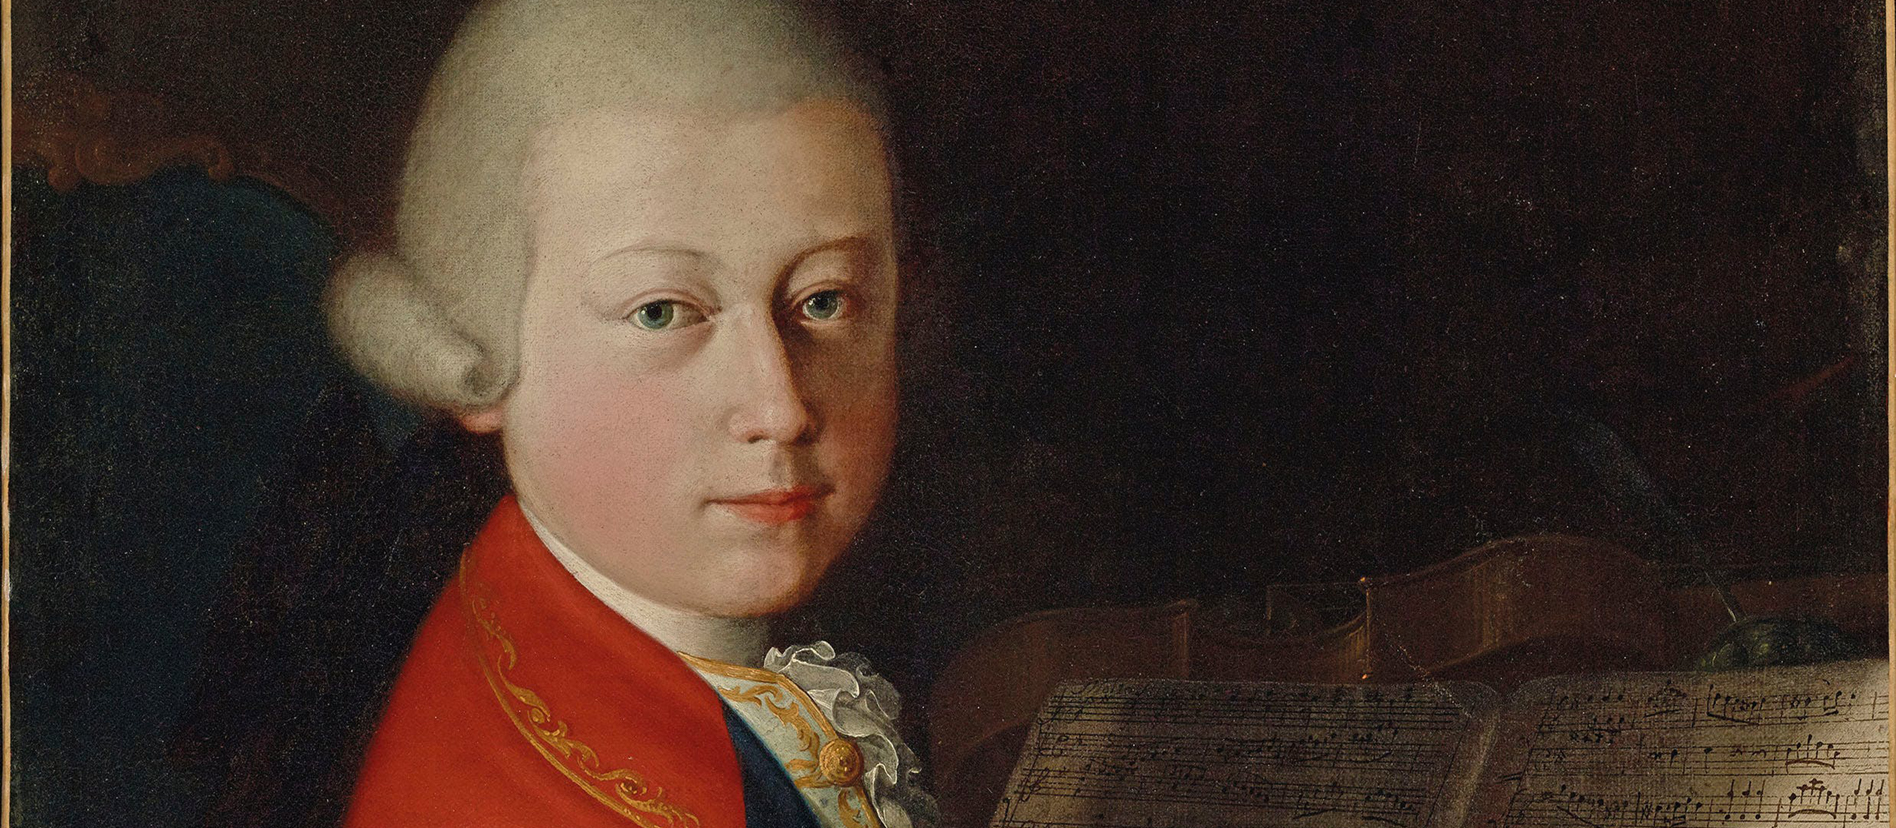 1771 – Mozart's Perspective - The Mozartists